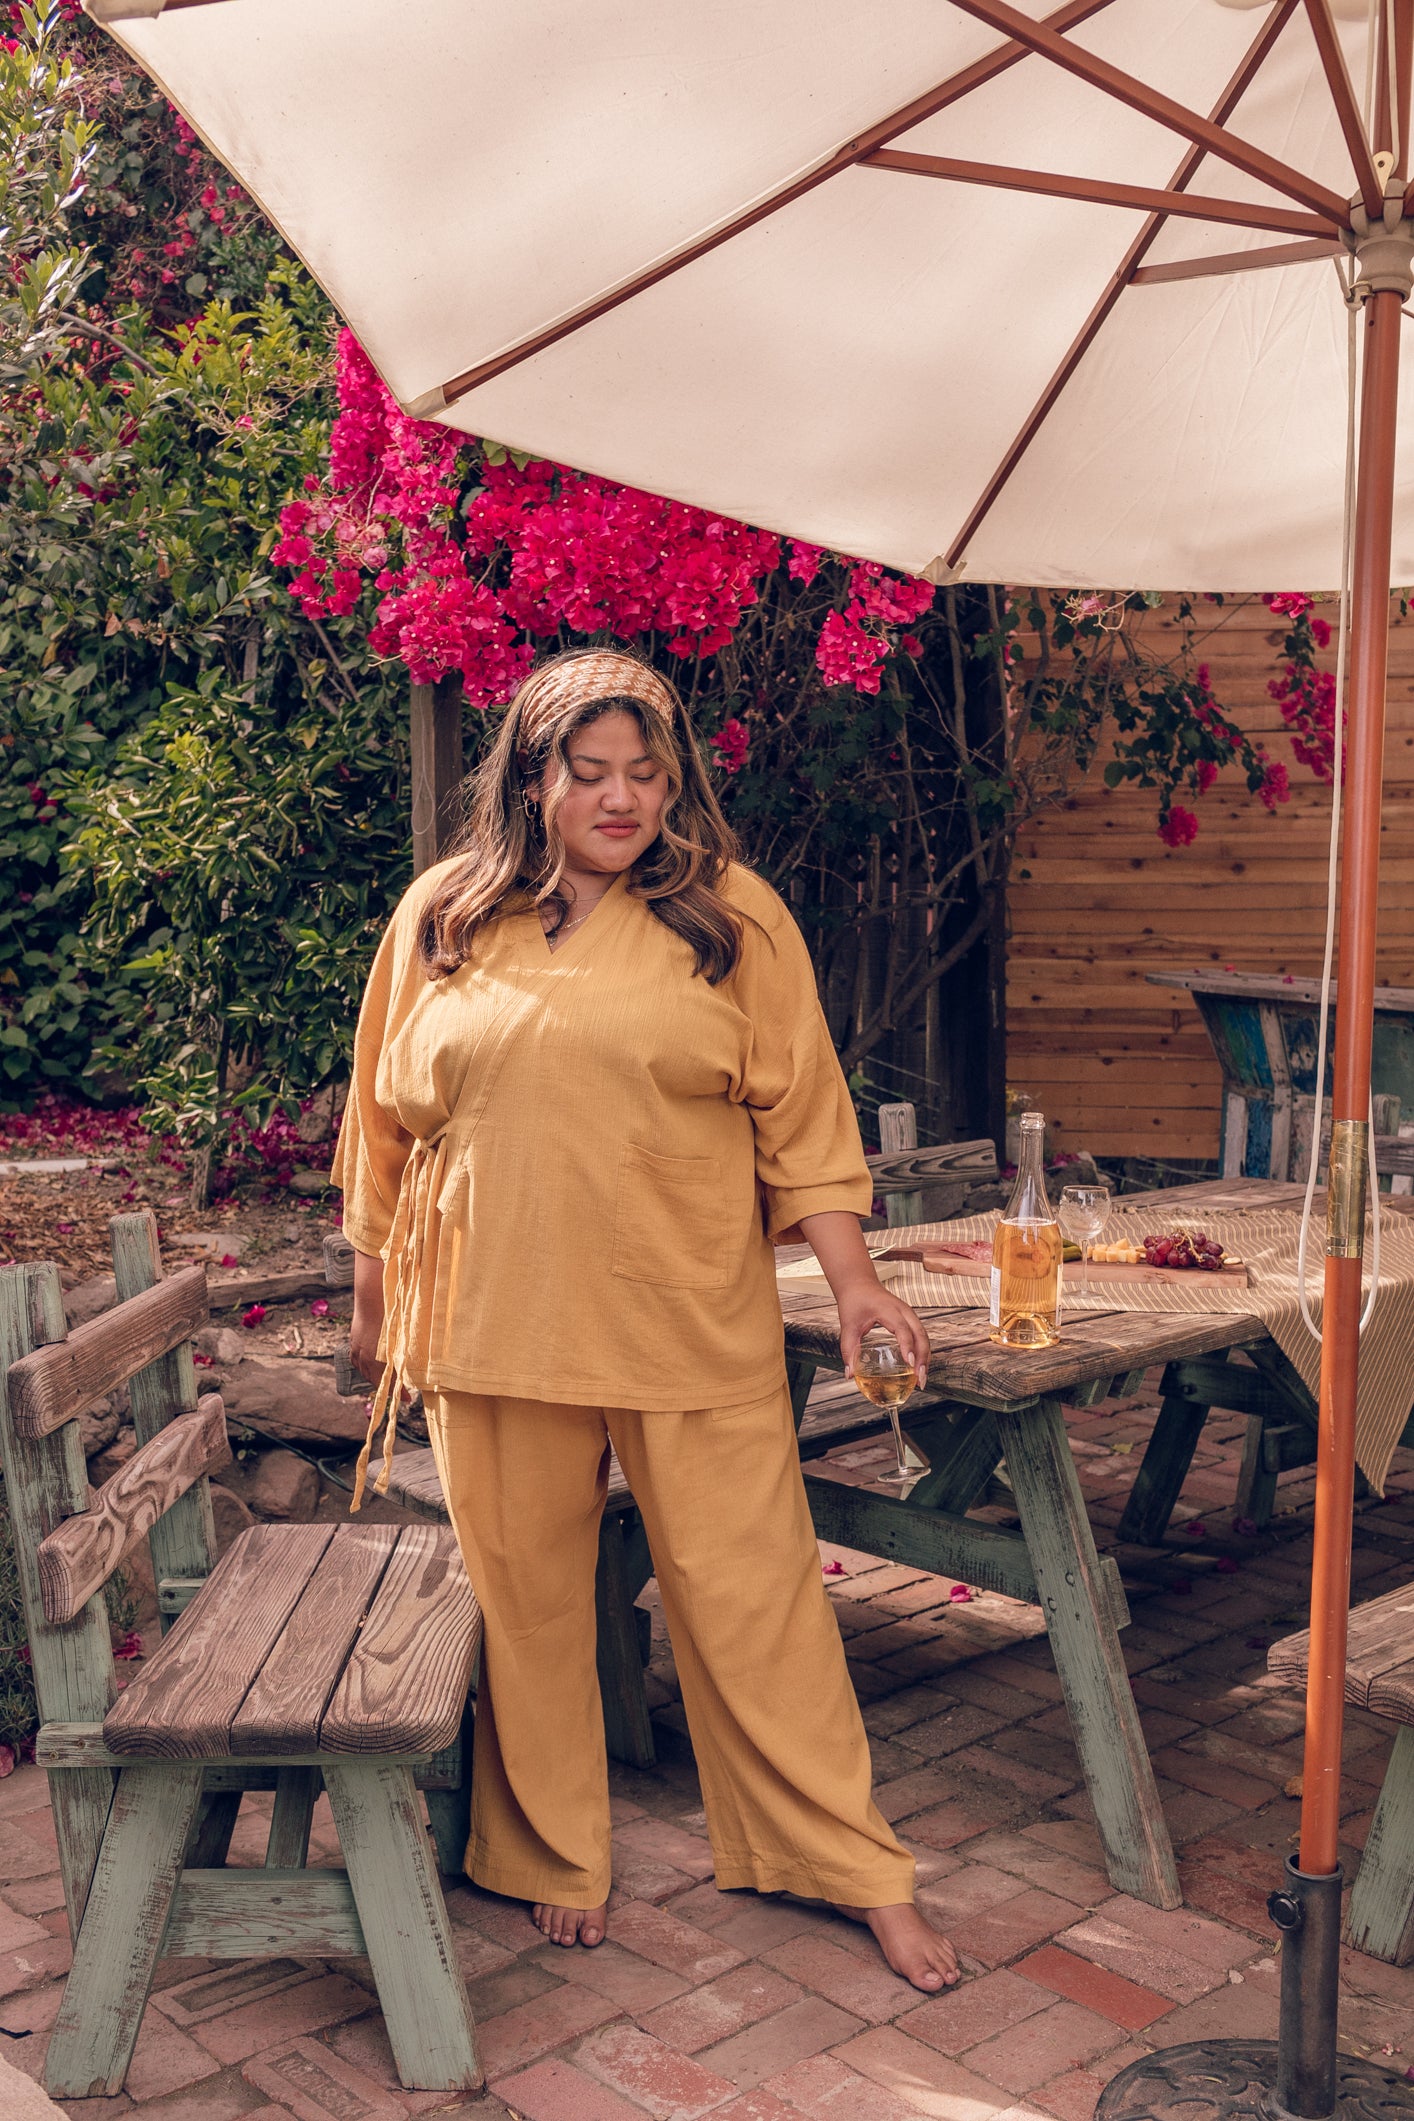 Kardeş Sile Loungewear Top and Pants in Marigold | Plus Size | Luxury 100%  Soft Turkish Sile Cotton | Indoor and Outdoor Wear – OddBird